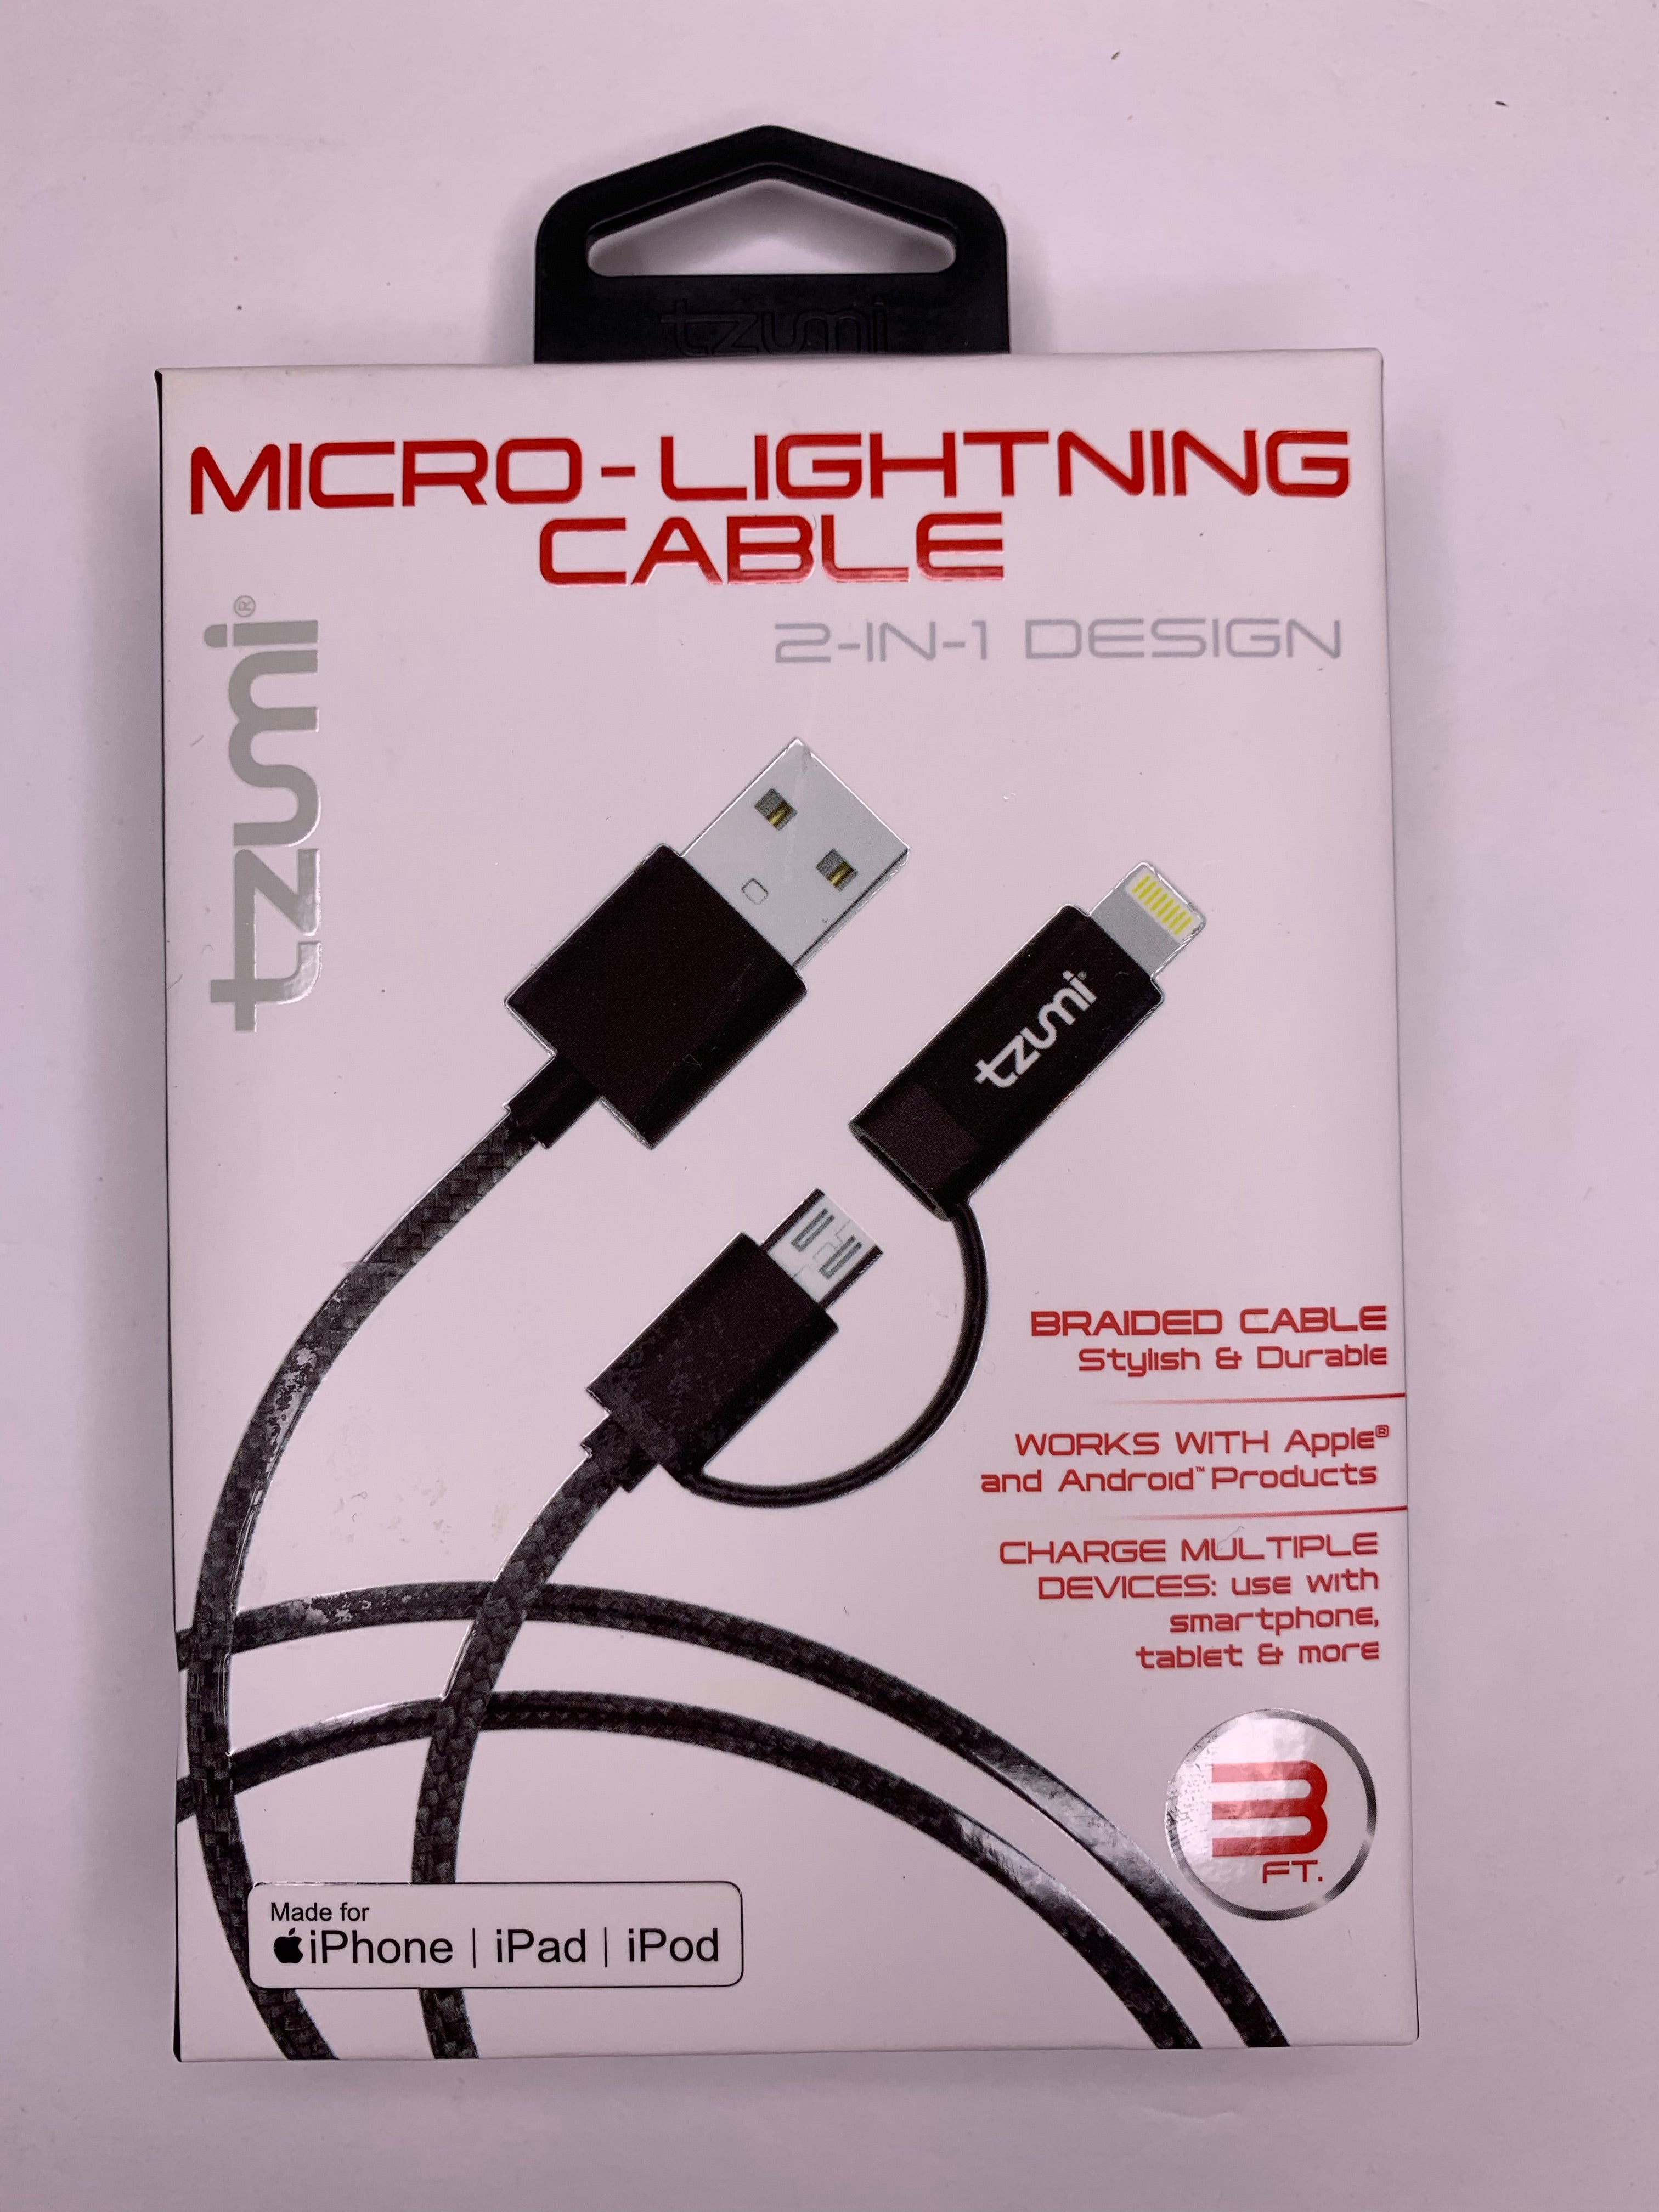 Tzumi Micro Lightning Cable 2-in-1 Design iPhone iPad iPod Cable